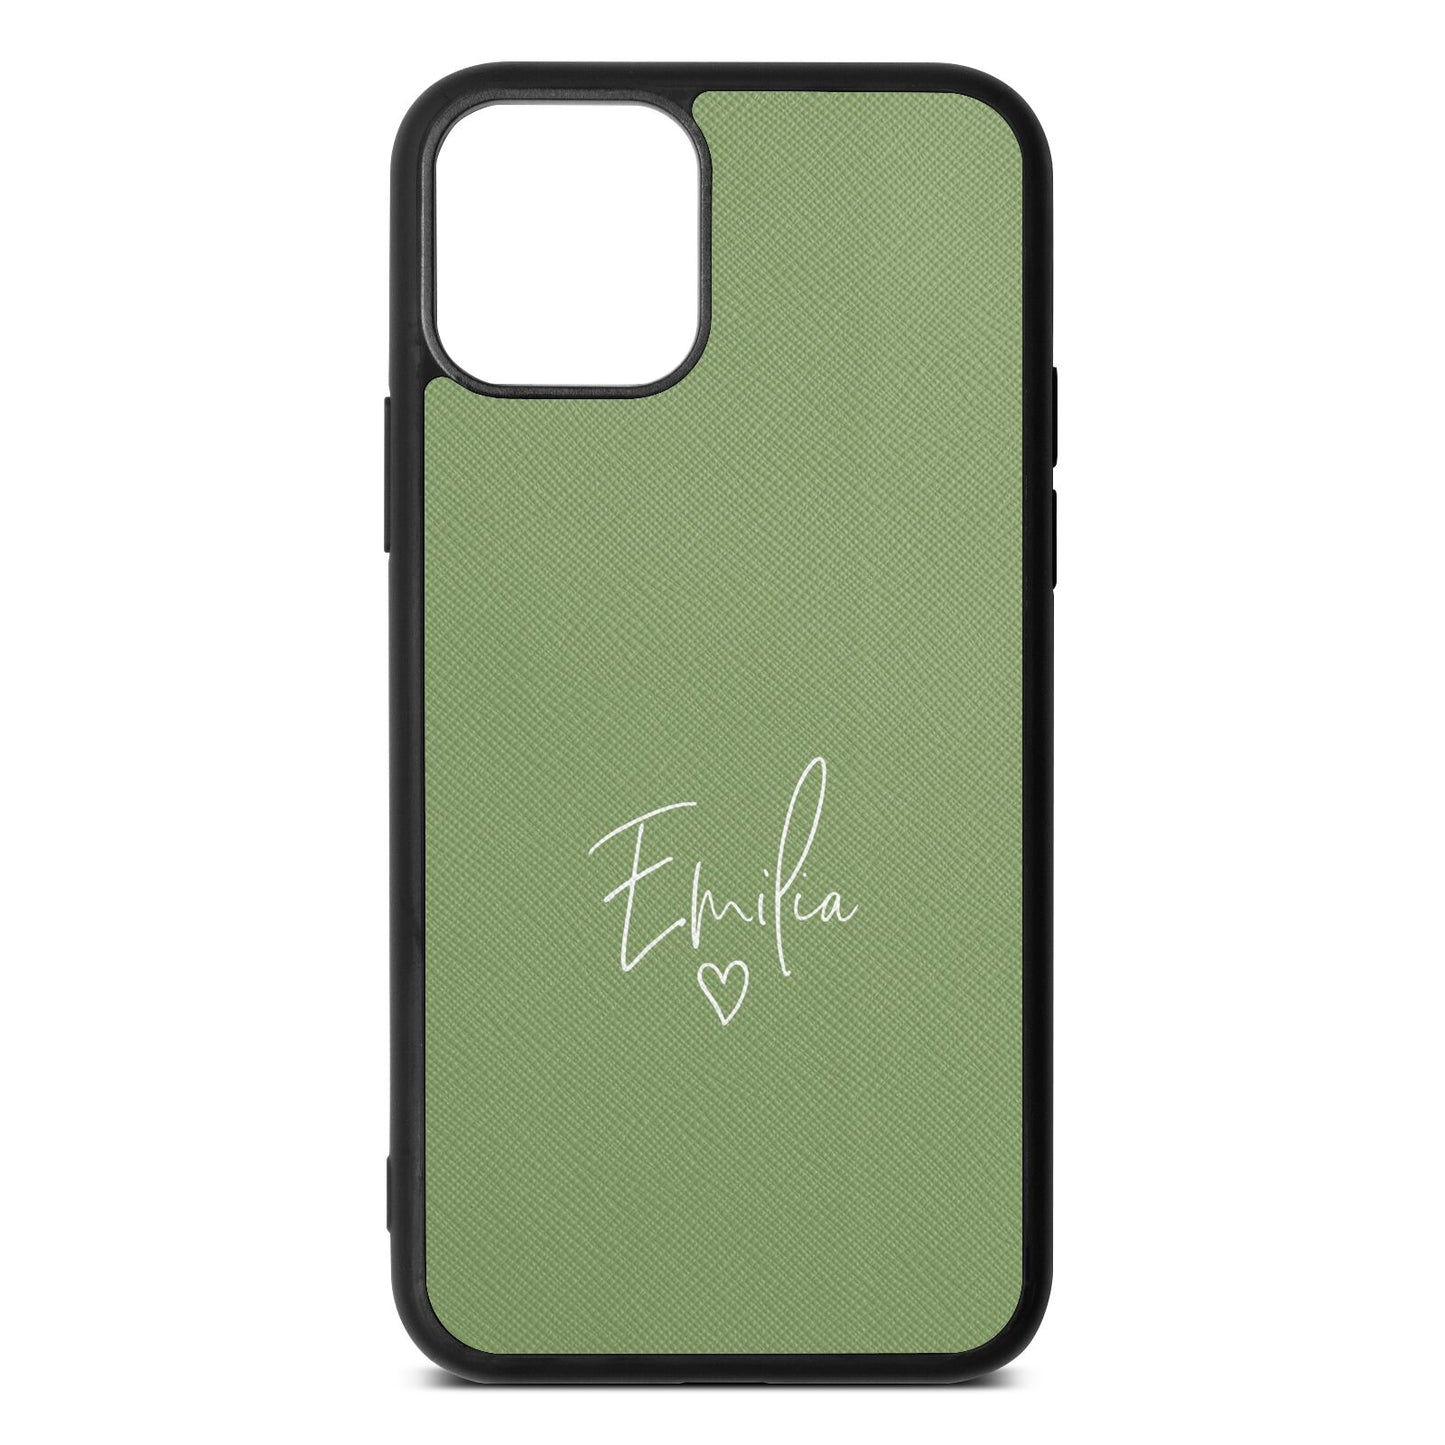 White Handwritten Name Transparent Lime Saffiano Leather iPhone 11 Pro Case